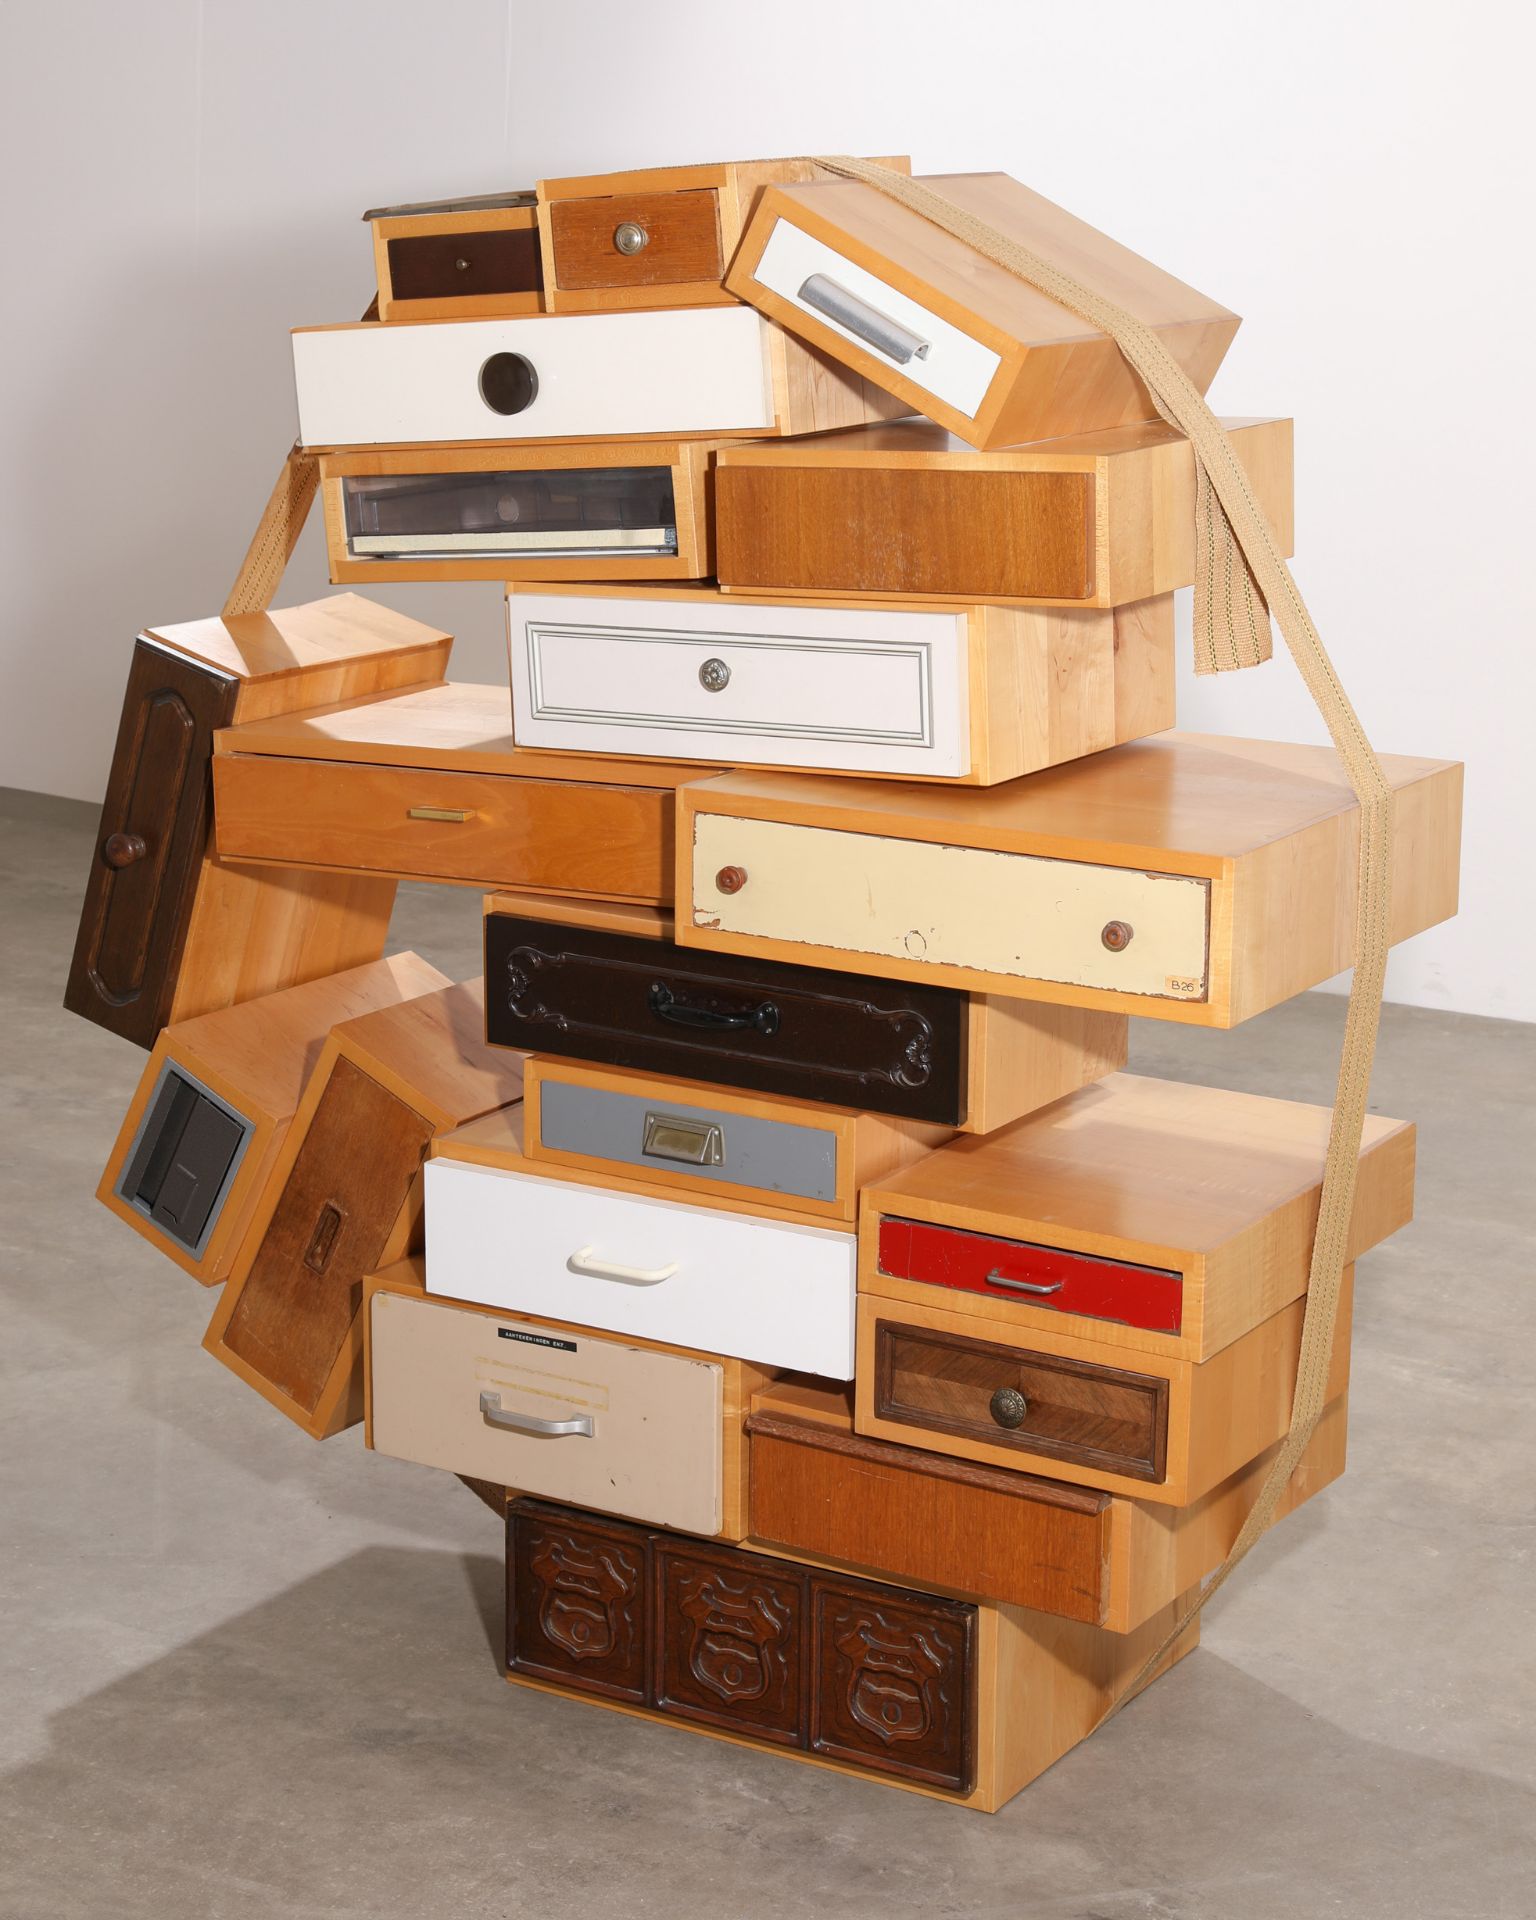 Tejo Rémy, droog design, Drawer object, model You can't lay down your memories - Image 2 of 9